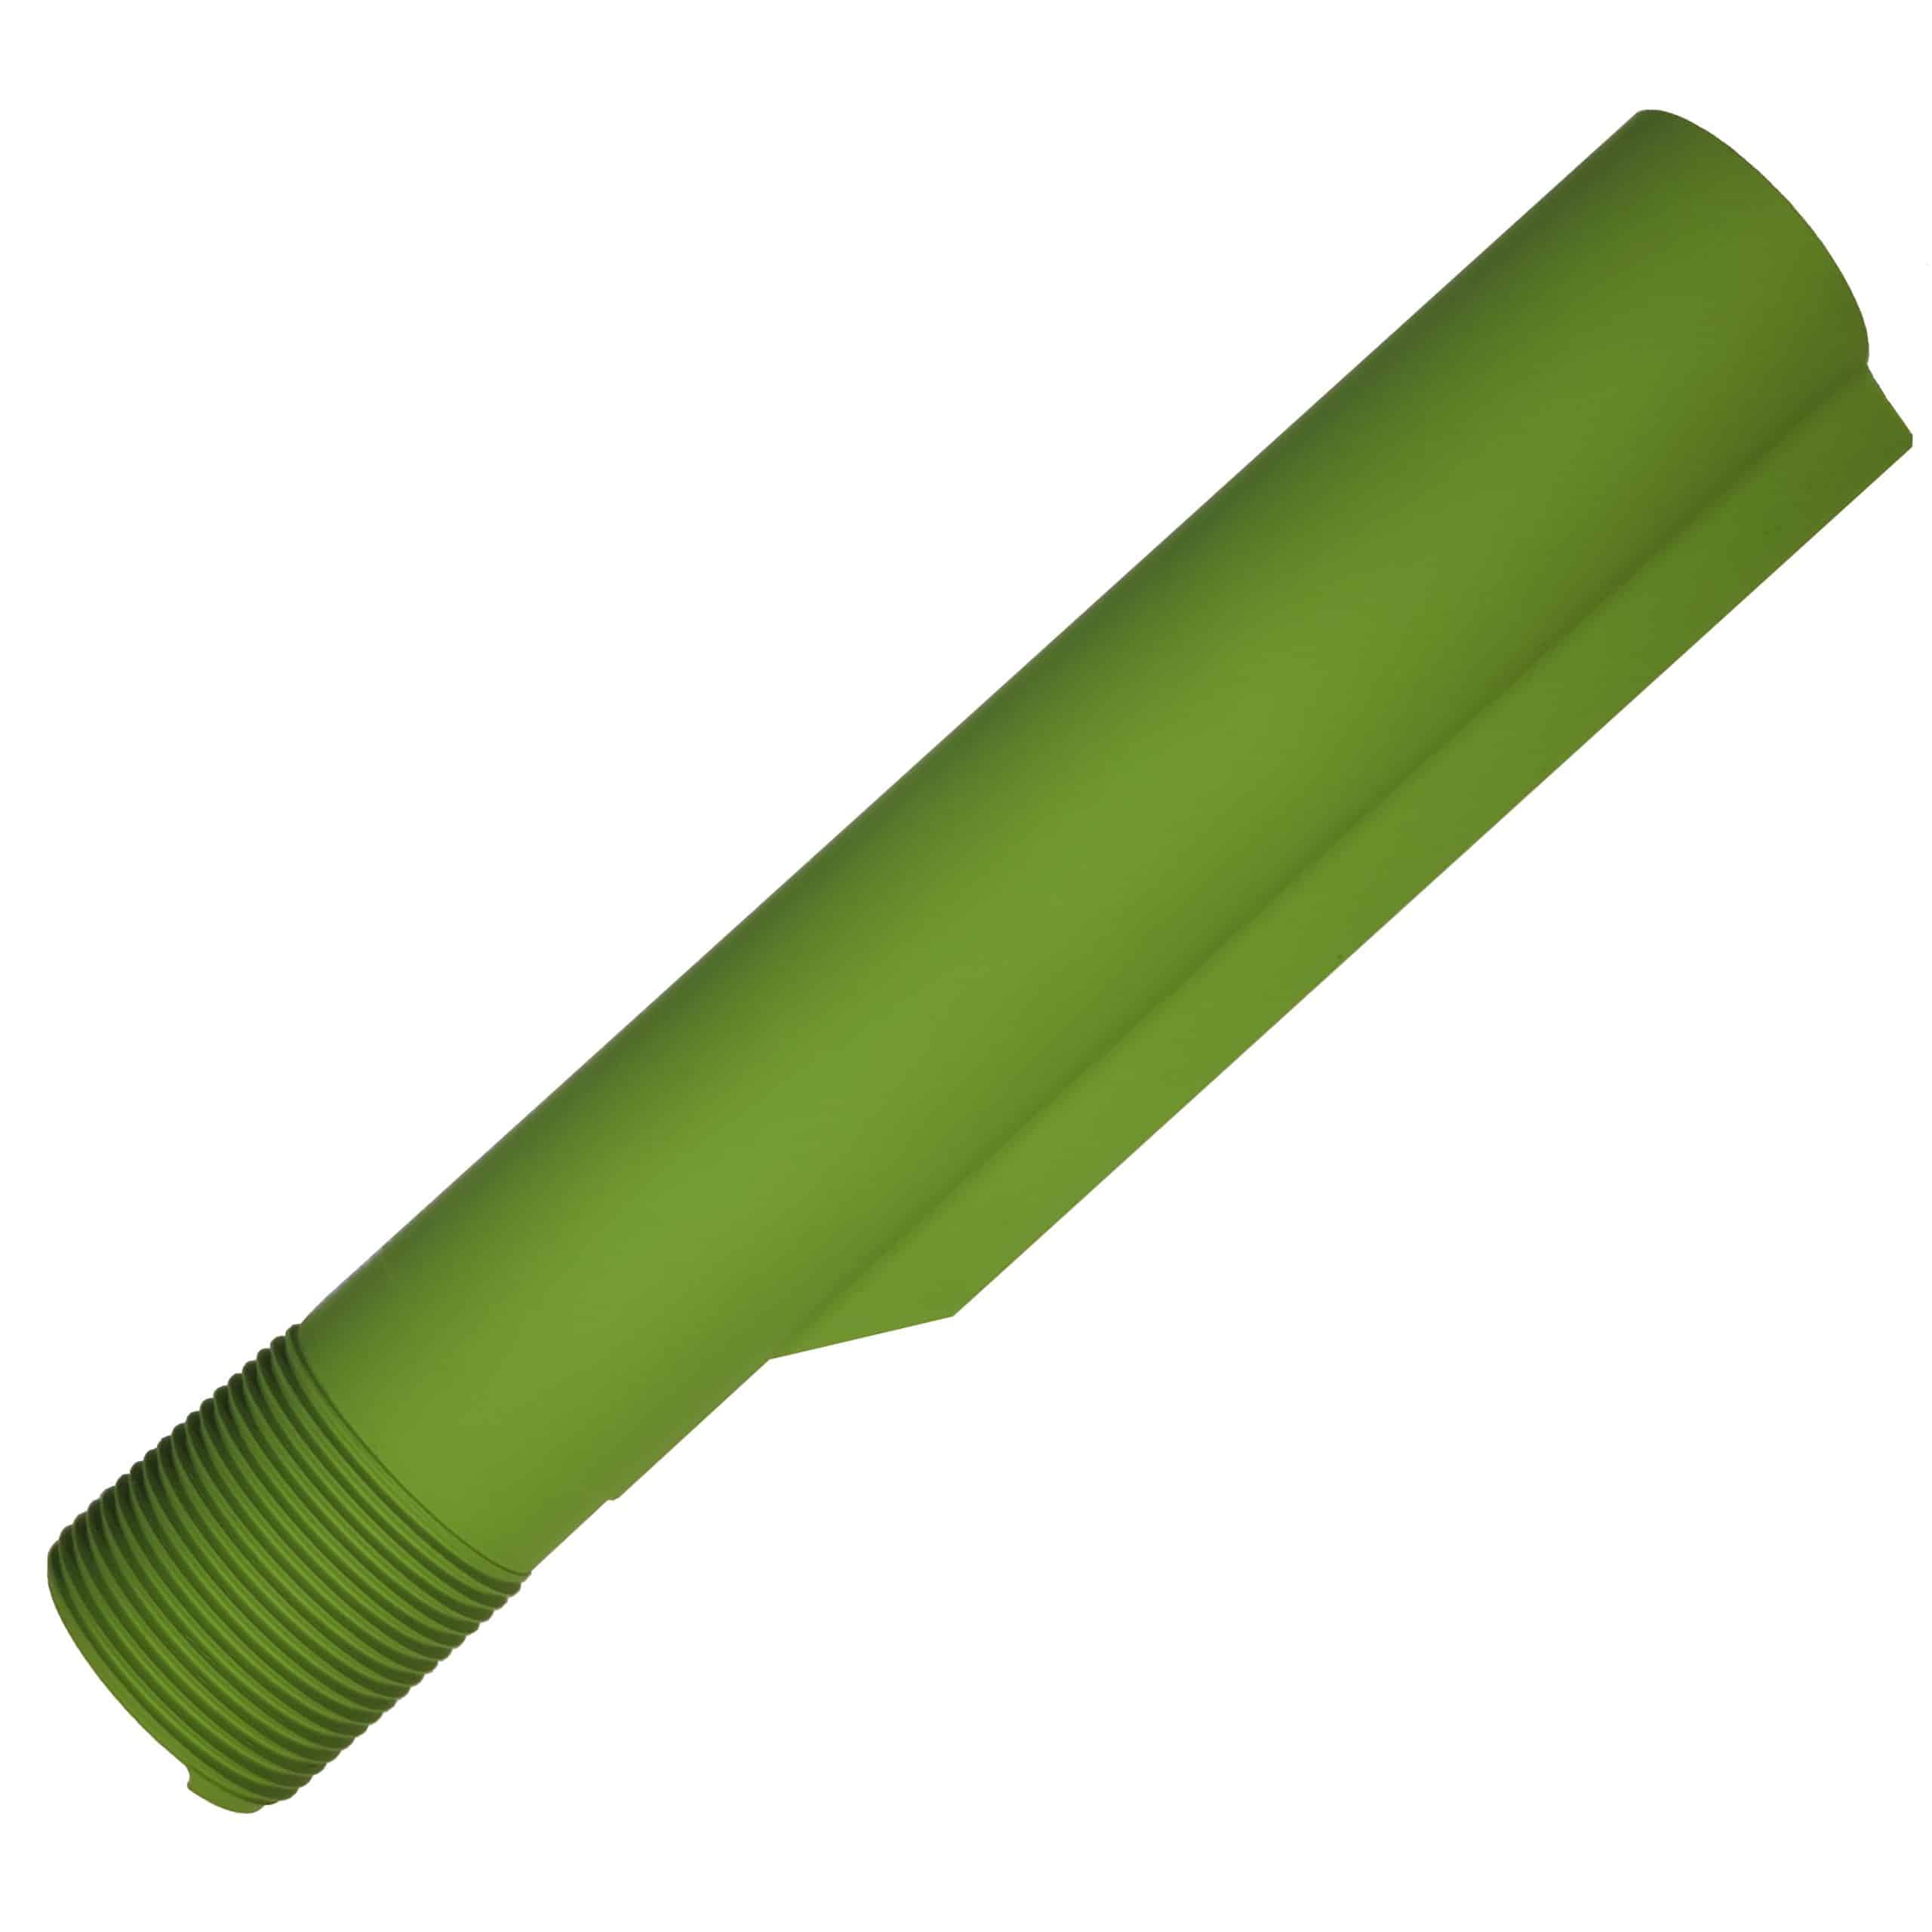 AR-15 Mil-Spec Plain Buffer Tube in Zombie Green *CLOSEOUT*